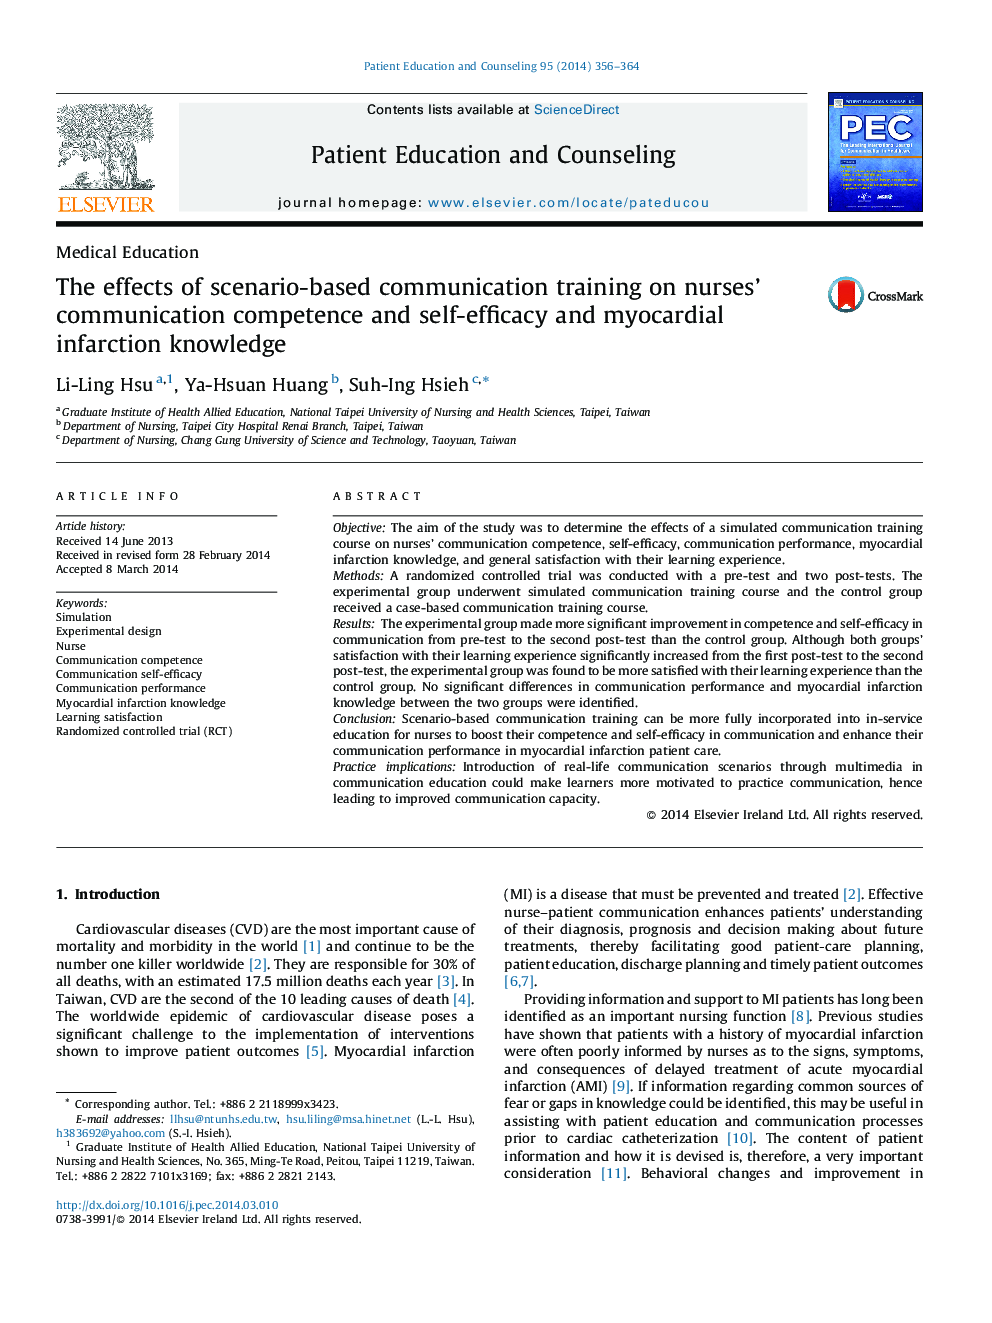 The effects of scenario-based communication training on nurses' communication competence and self-efficacy and myocardial infarction knowledge